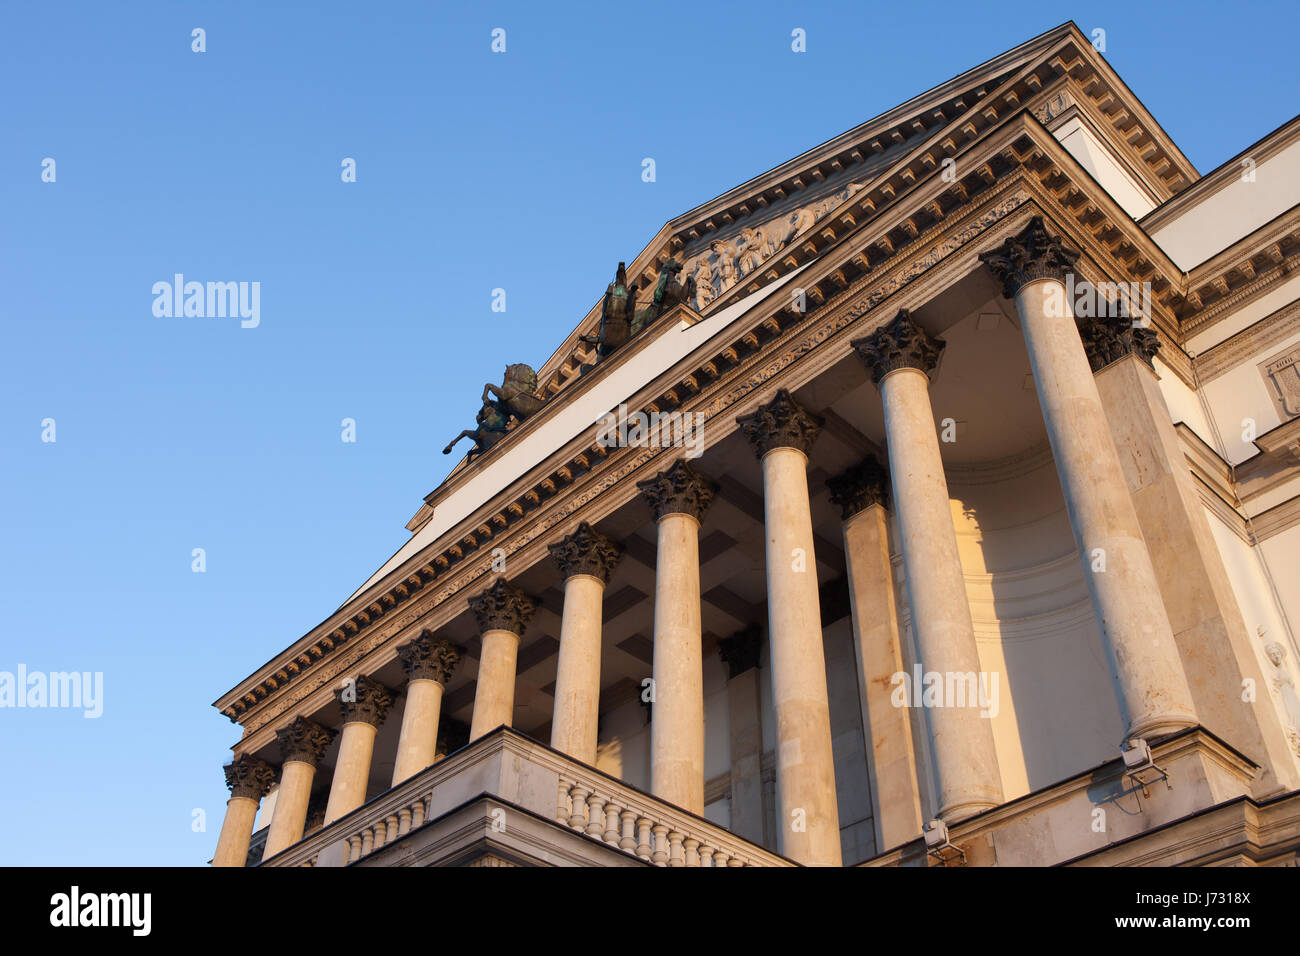 Poland, city of Warsaw, Grand Theatre and National Opera architectural details, gallery with colonnade above entrance, classical style architecture Stock Photo